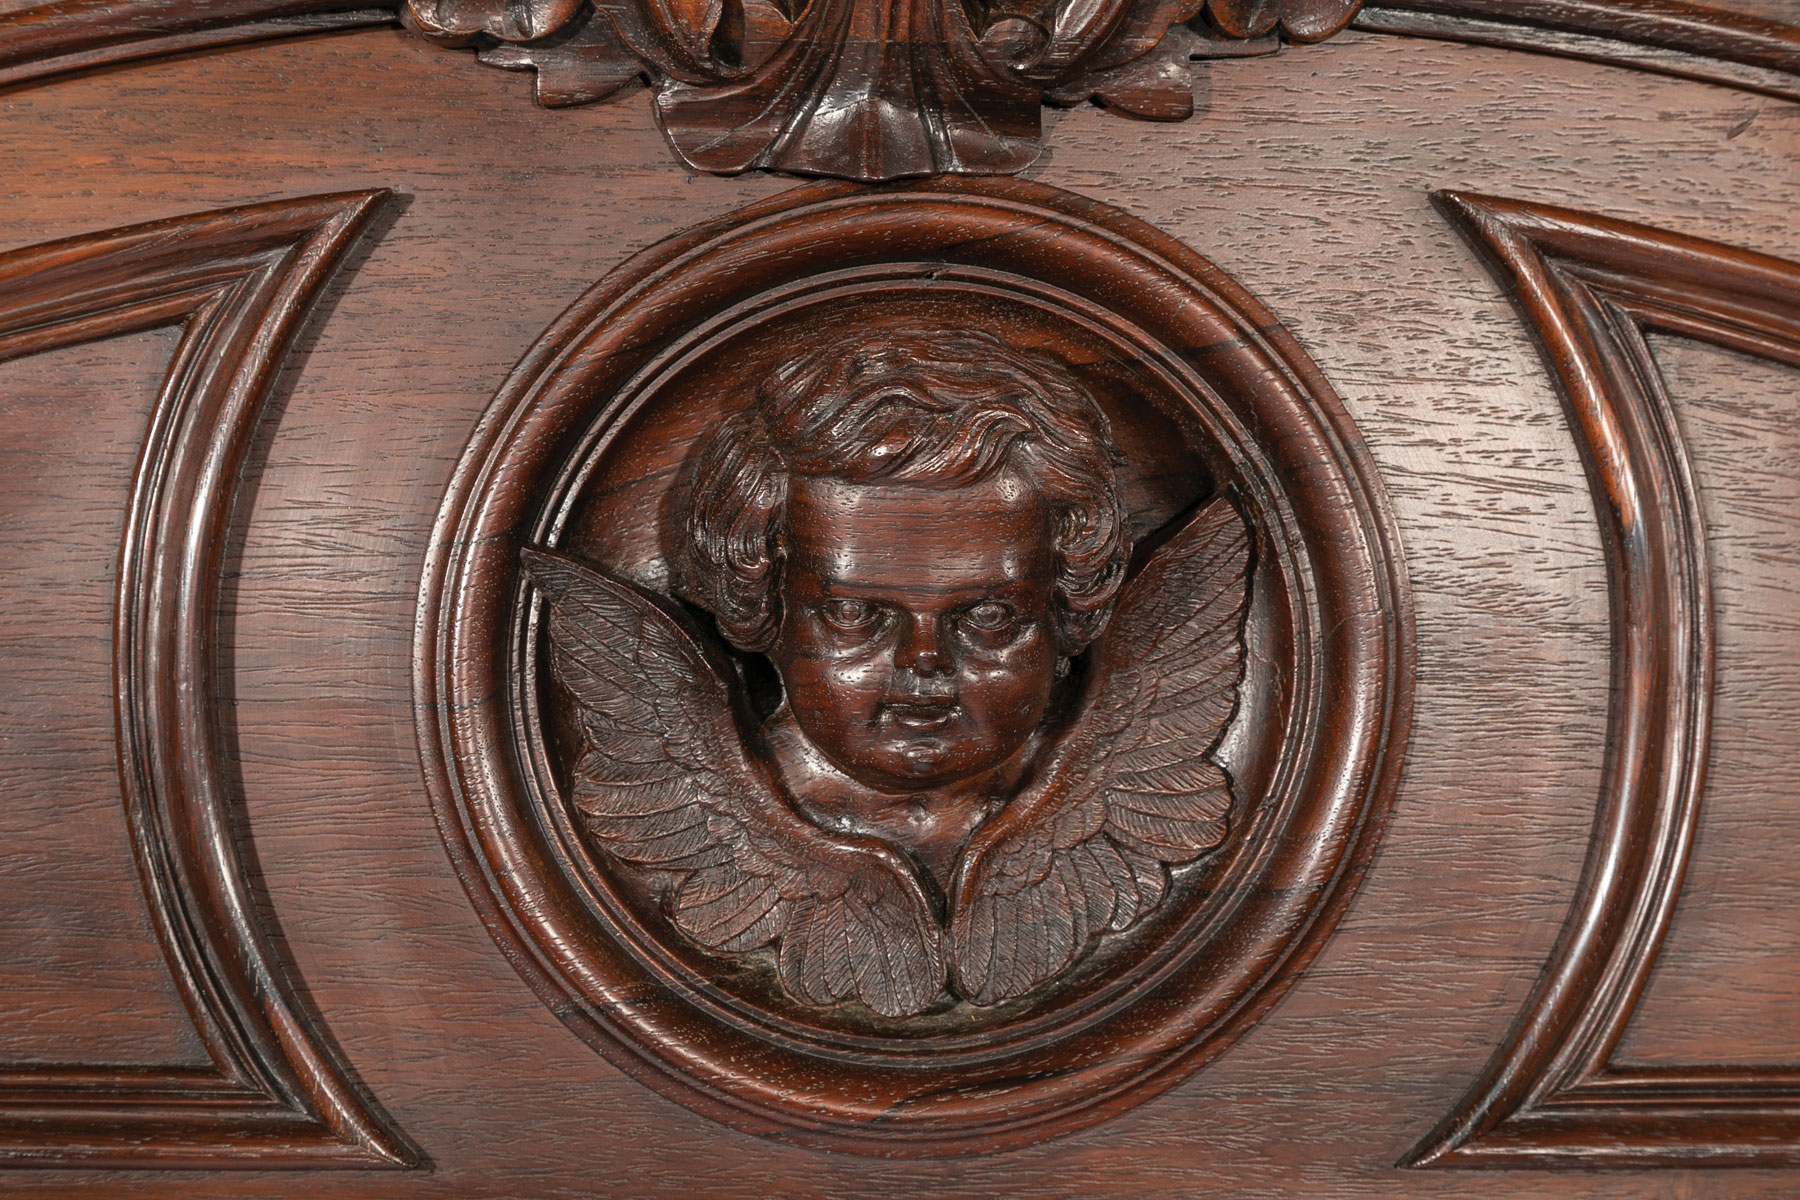 Very Fine American Carved Rosewood Bedroom Suite , mid-19th c., labeled A. (Alexander) Roux, incl. - Image 20 of 20